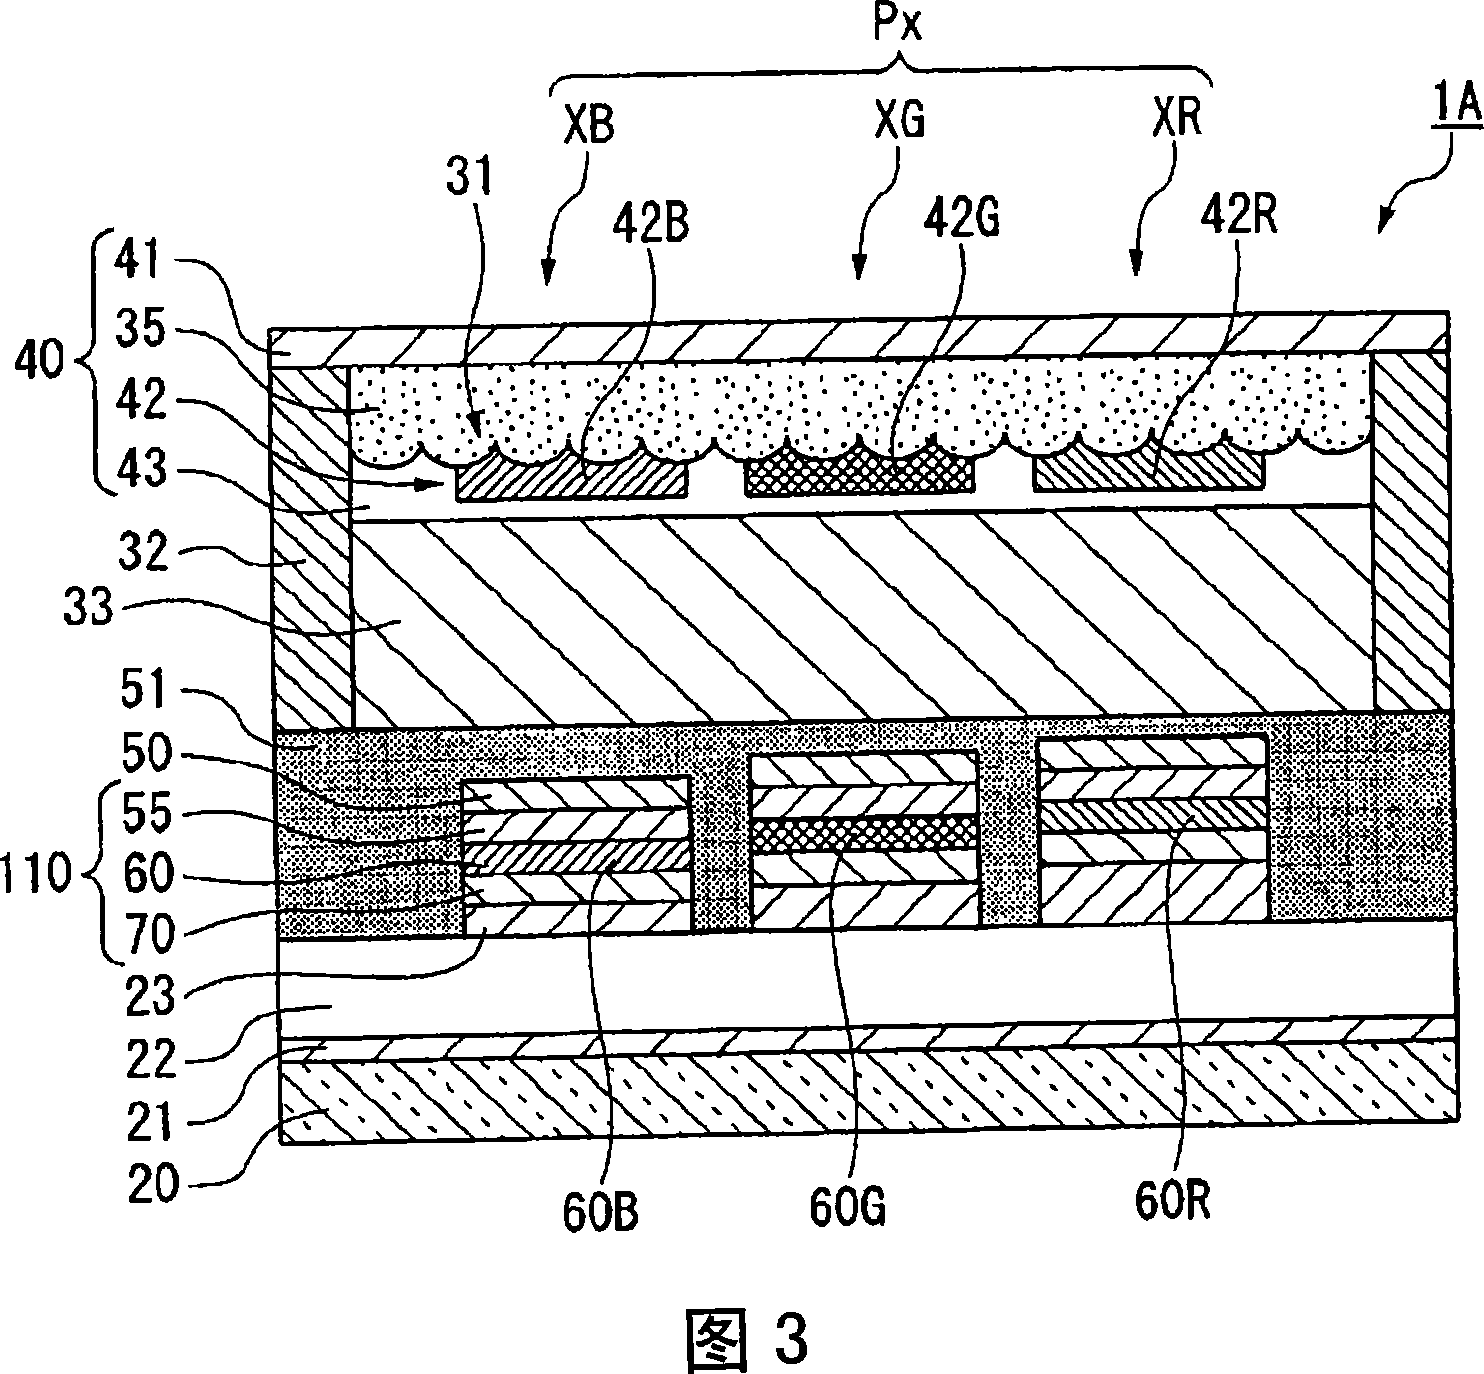 Luminous device, method of manufacturing luminous device and electronic device